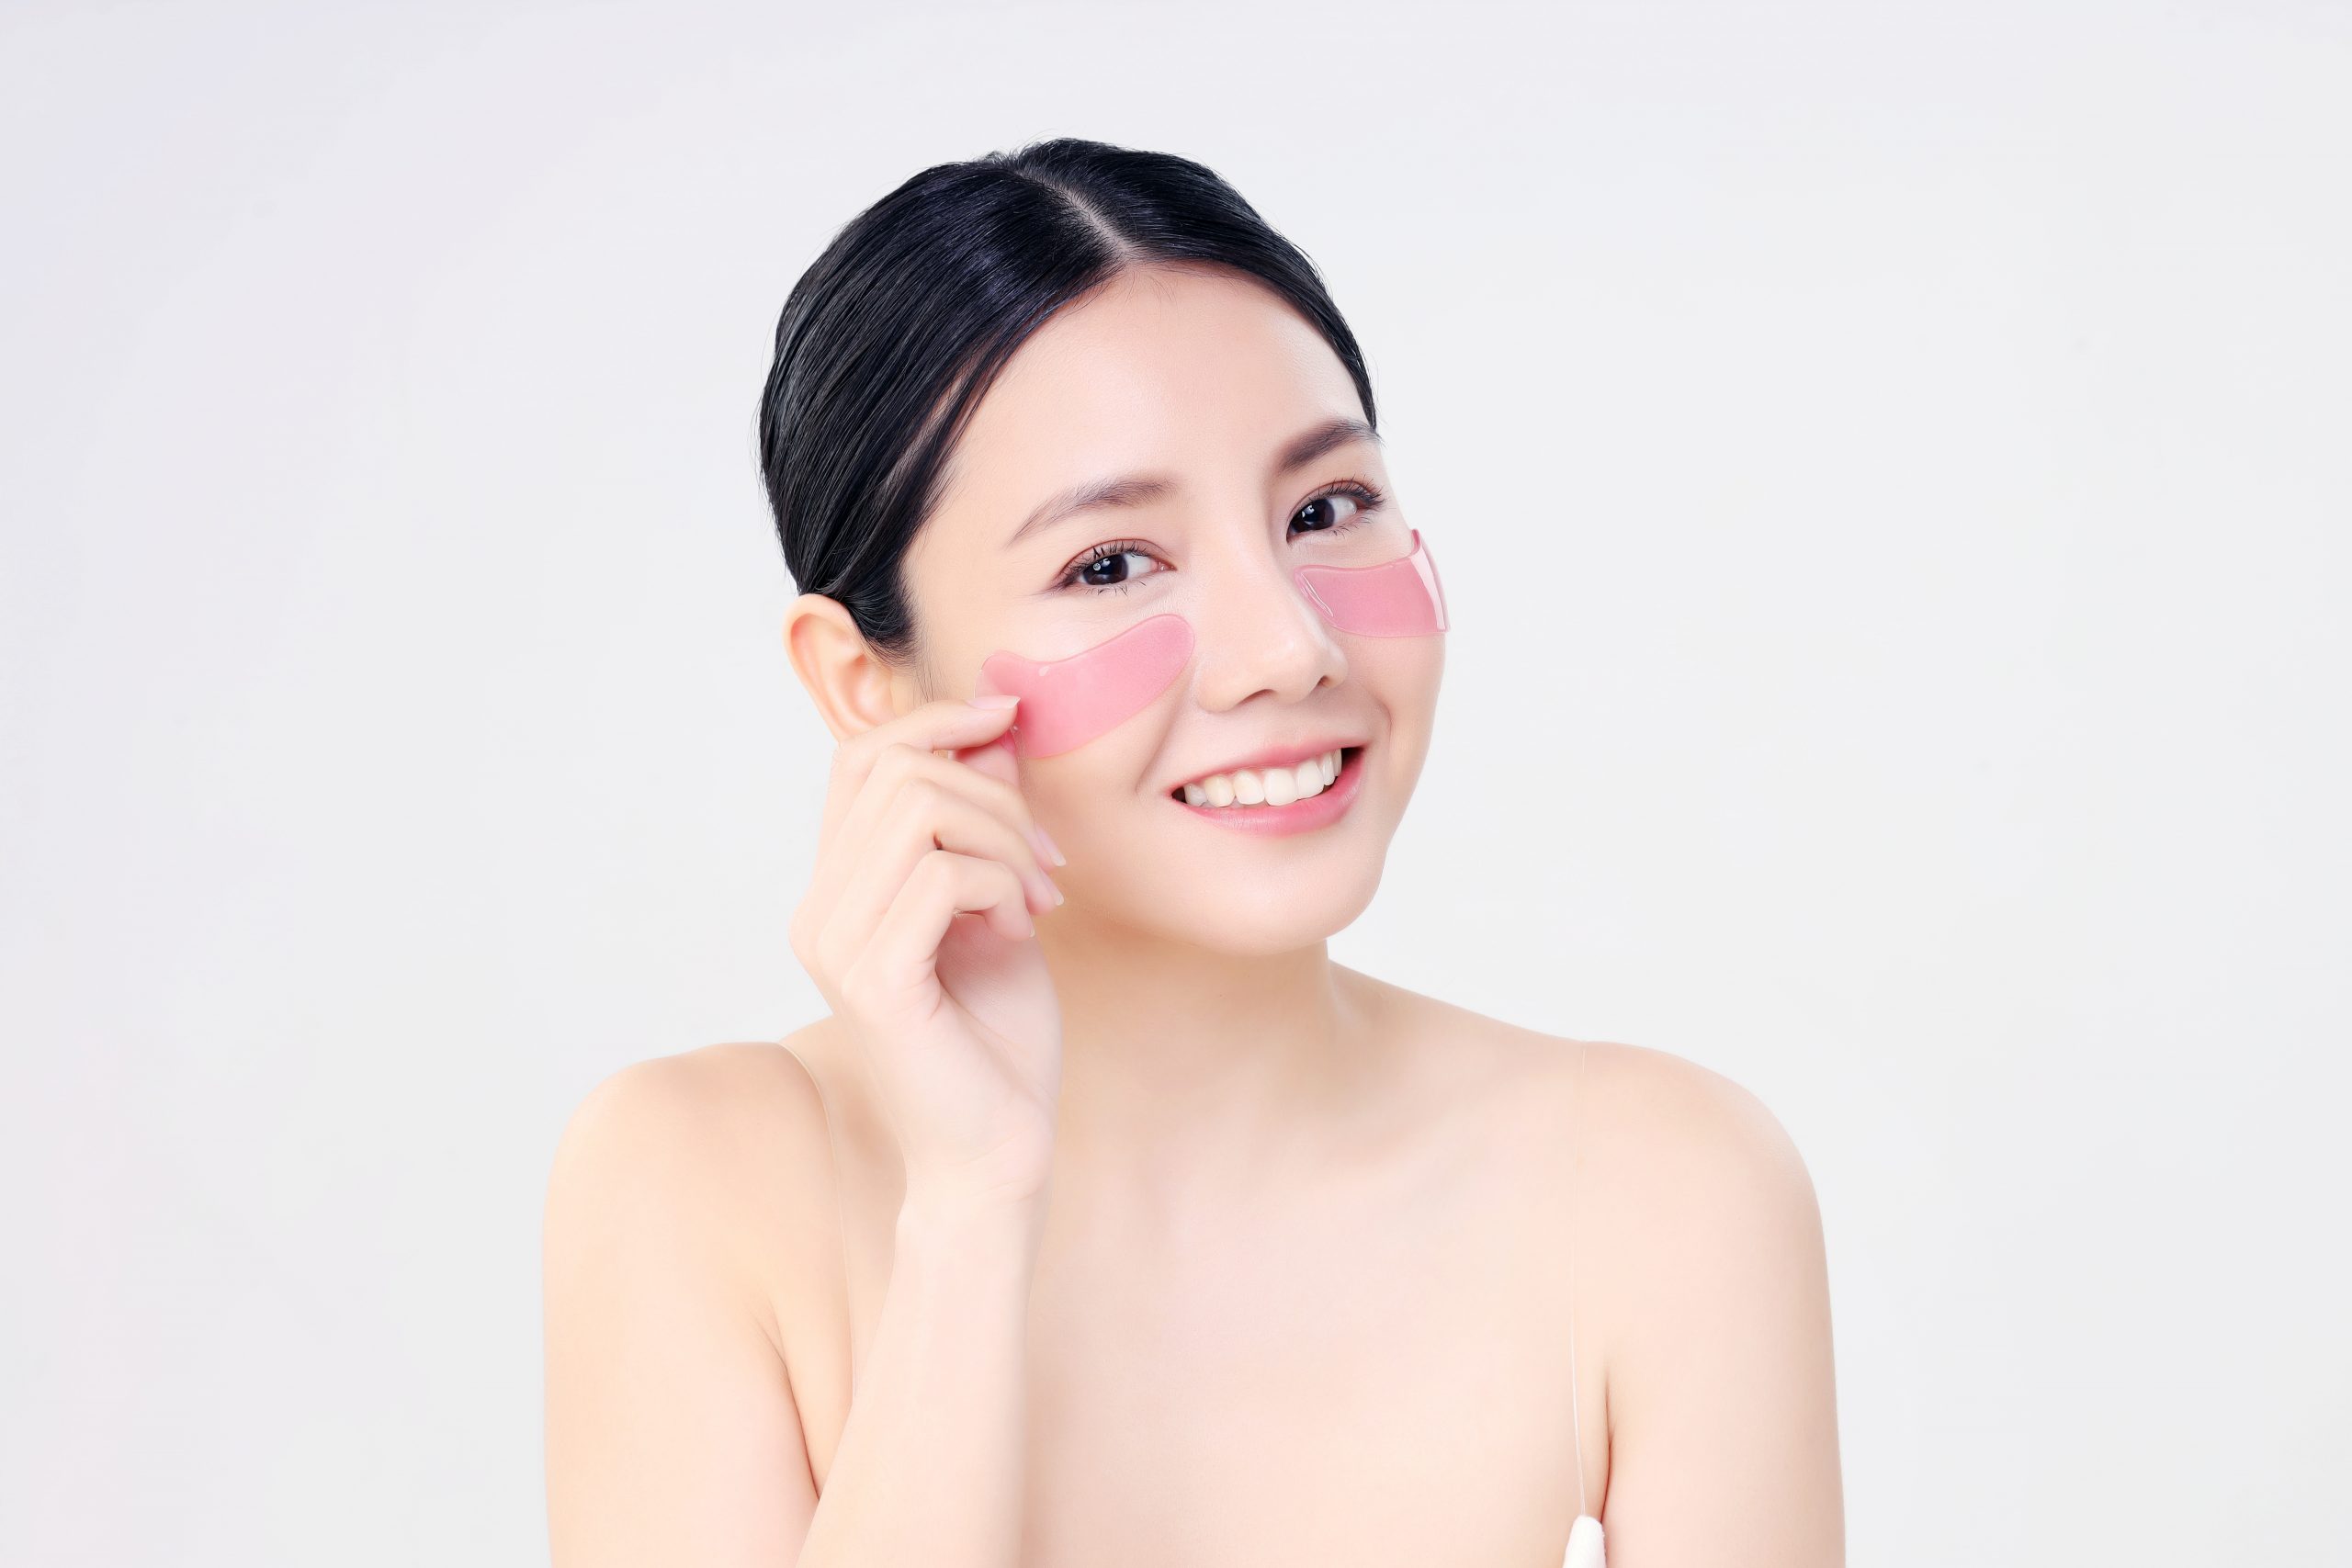 Cosmetic Eye Mask. Close Up Beauty Face Asian Woman With Fresh Clean Skin Using Eye Pad. Eye Care Treatment. Isolated on white. Beauty And Skin Care Concept.